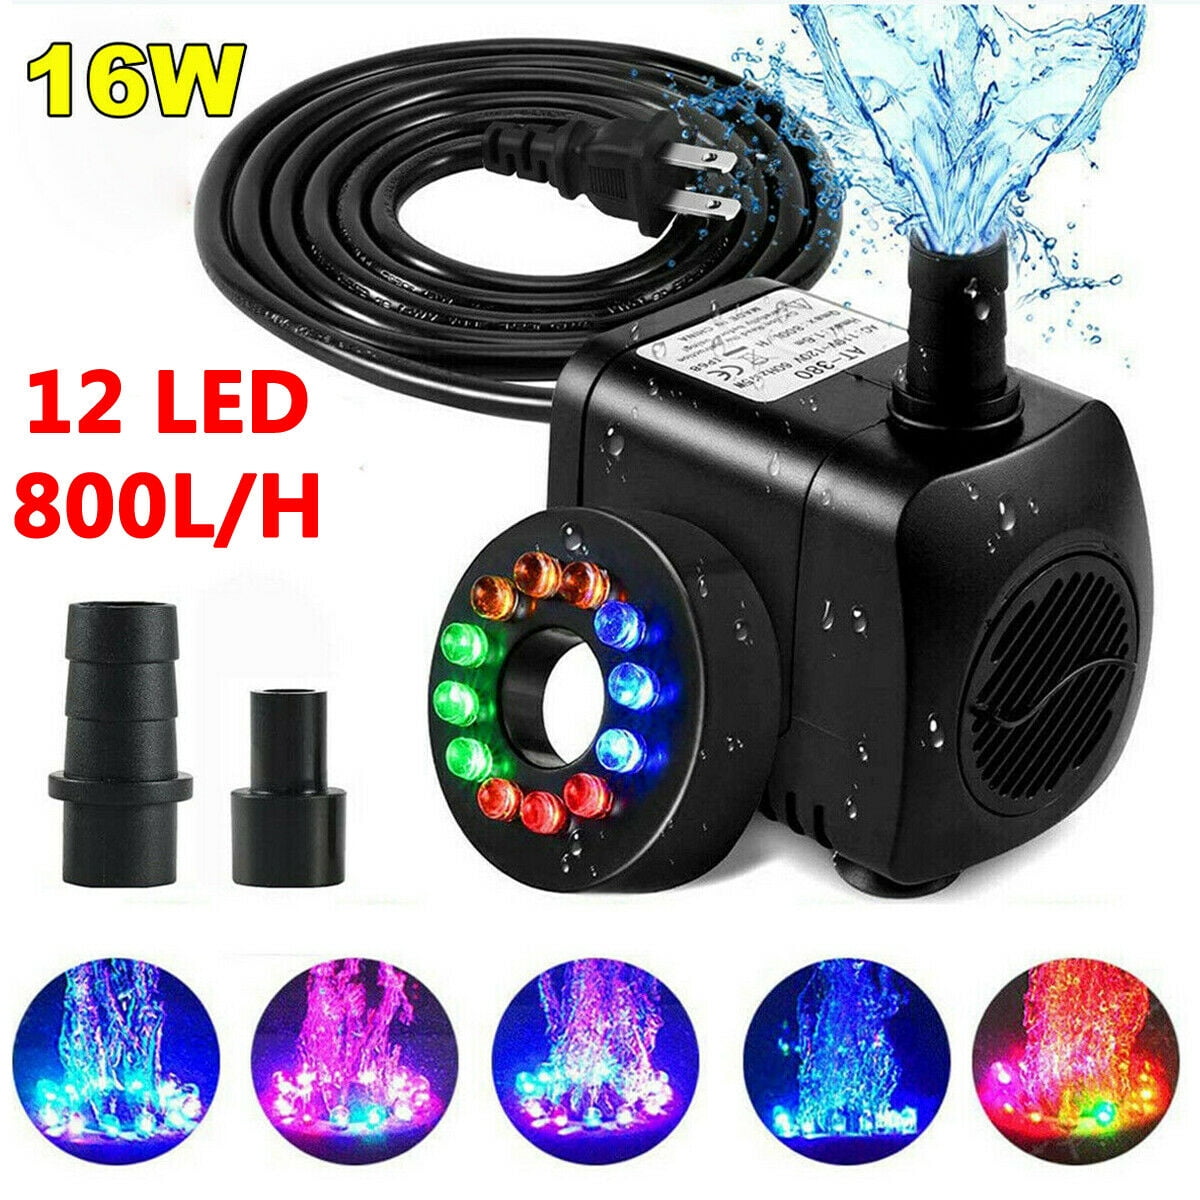 Submersible Water Pump With 12 LED Light For Fountain Pool Garden Pond   ##Q 